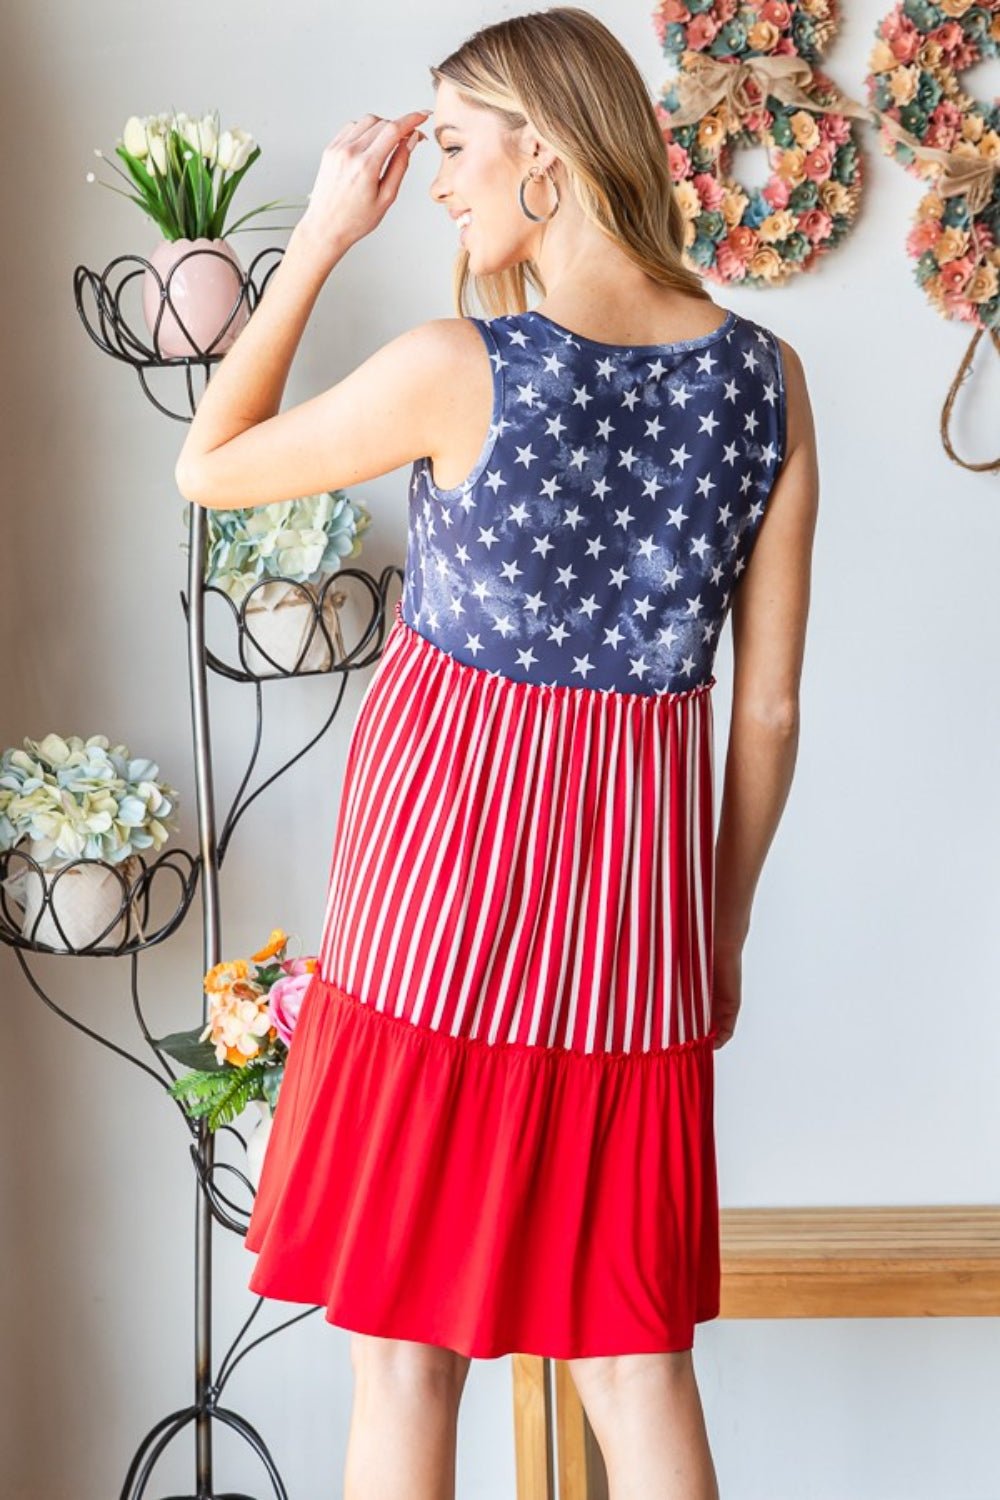 Heimish Full Size US Flag Theme Contrast Tank Dress - Happily Ever Atchison Shop Co.